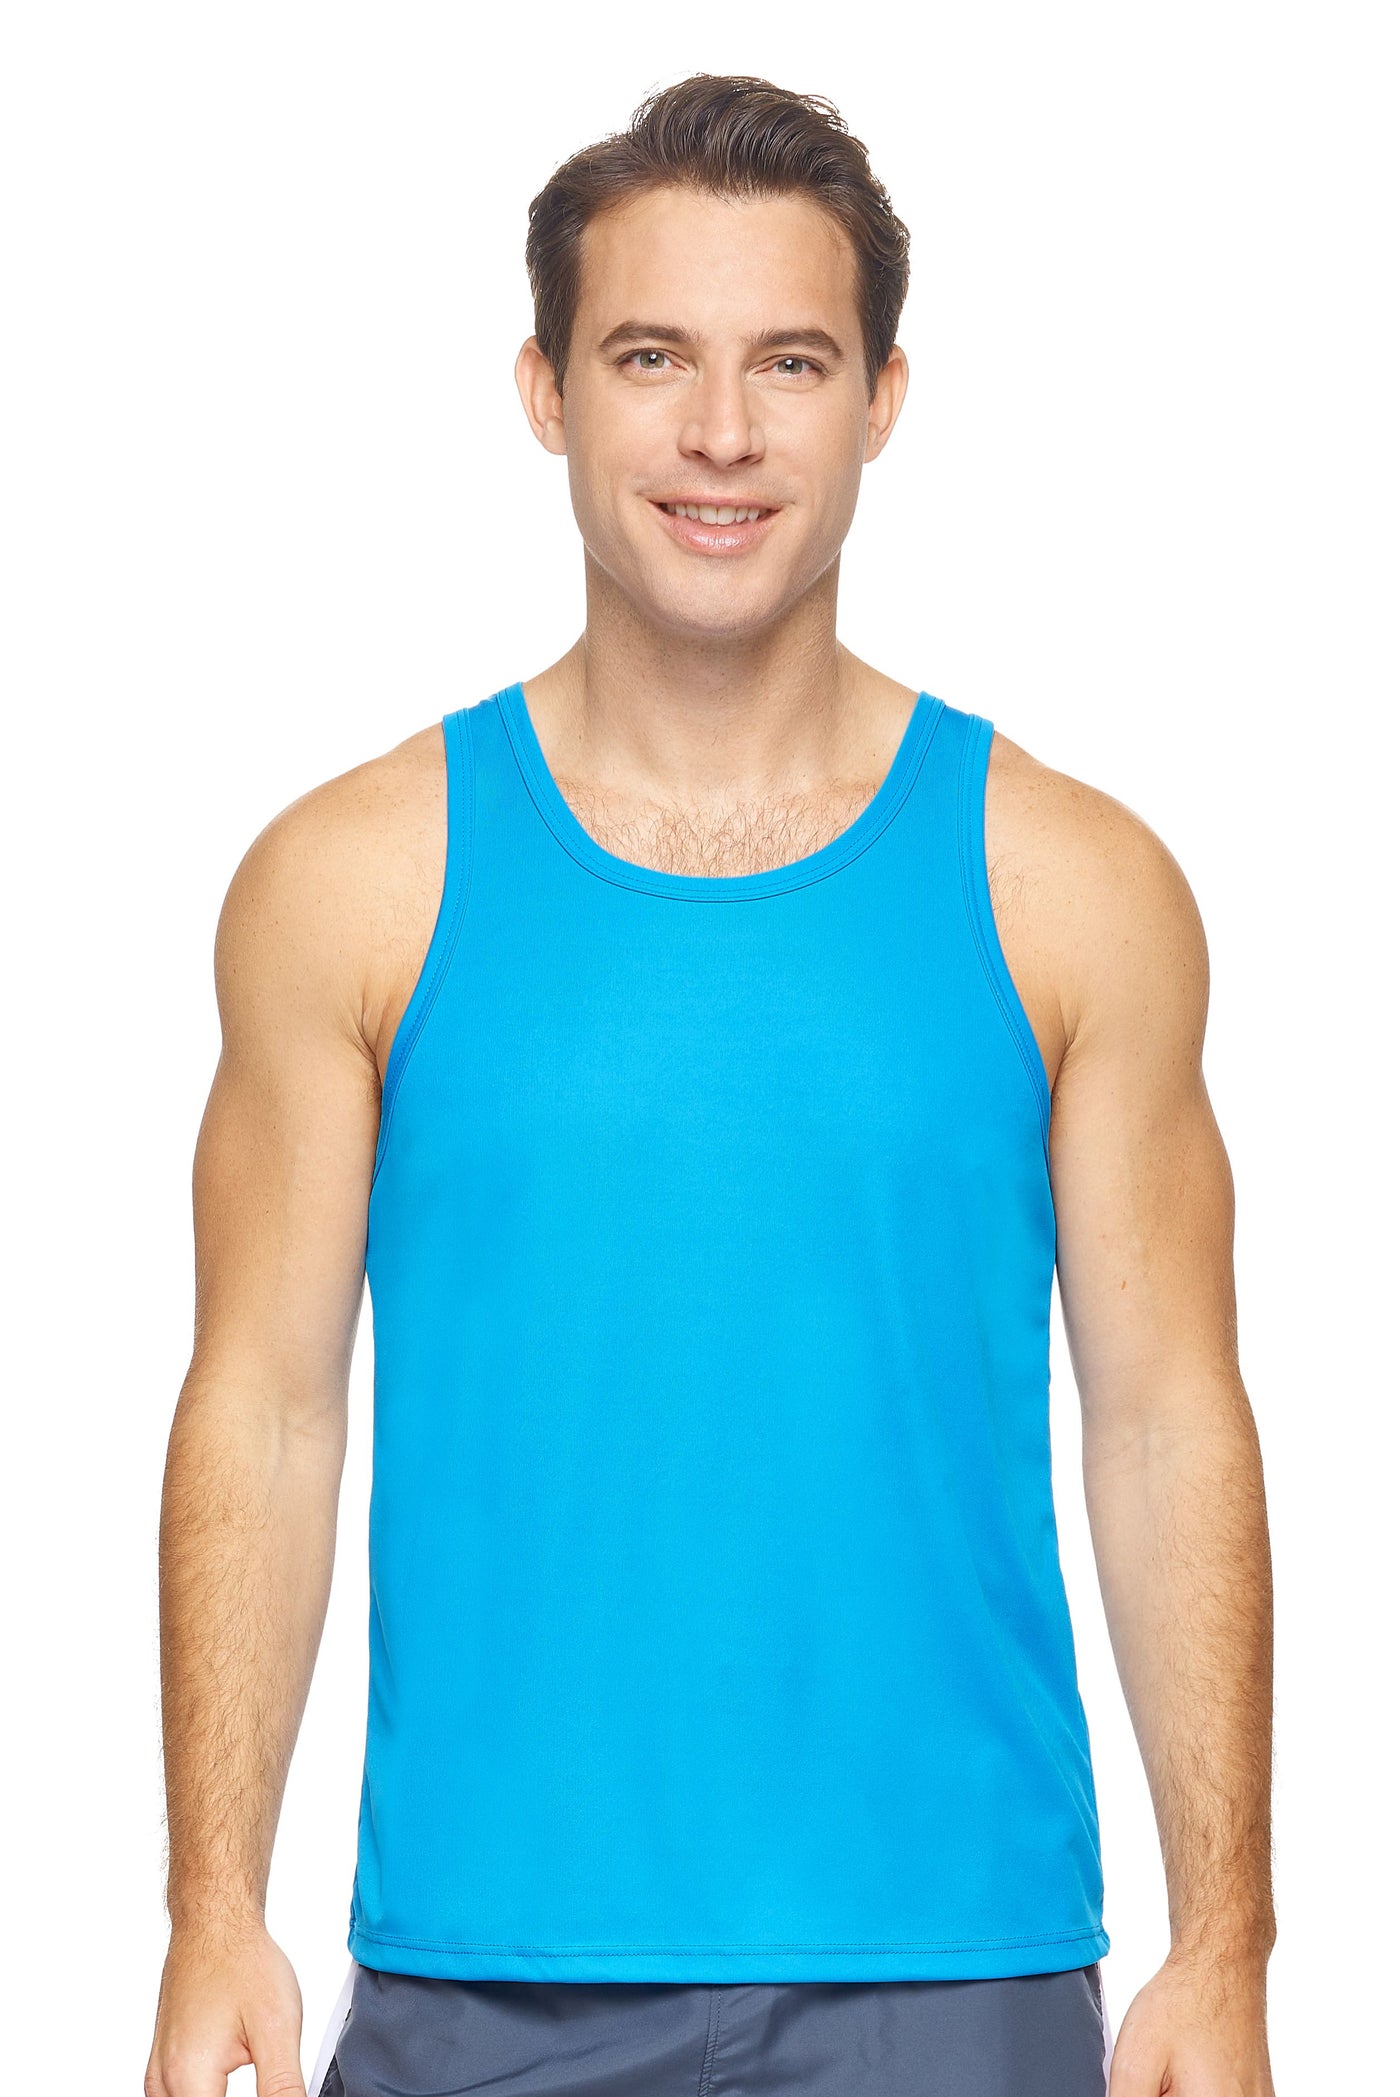 Expert Brand Retail Eco-Friendly Activewear Sportswear Men's pk MaX™ Endurance Sleeveless Tank Made in USA safety blue#color_safety-blue